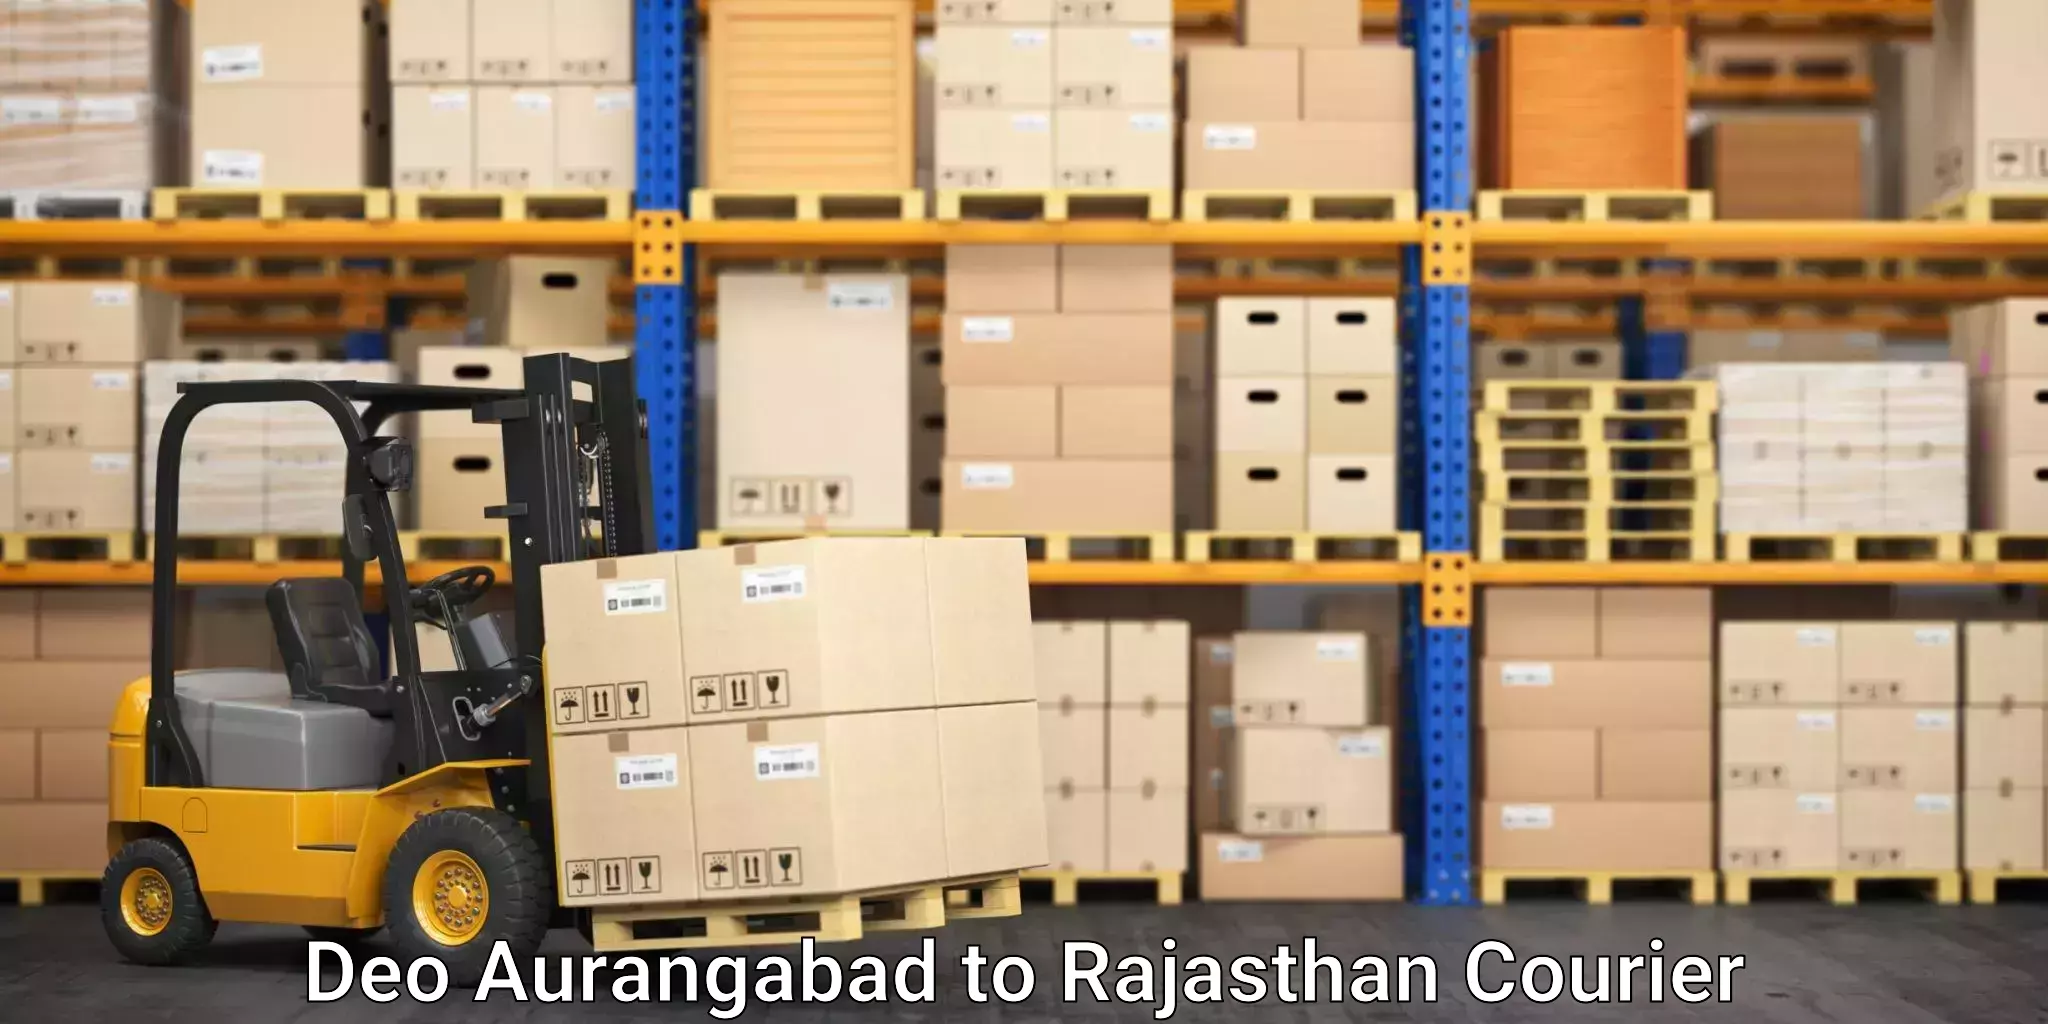 Furniture transport services in Deo Aurangabad to Rajasthan